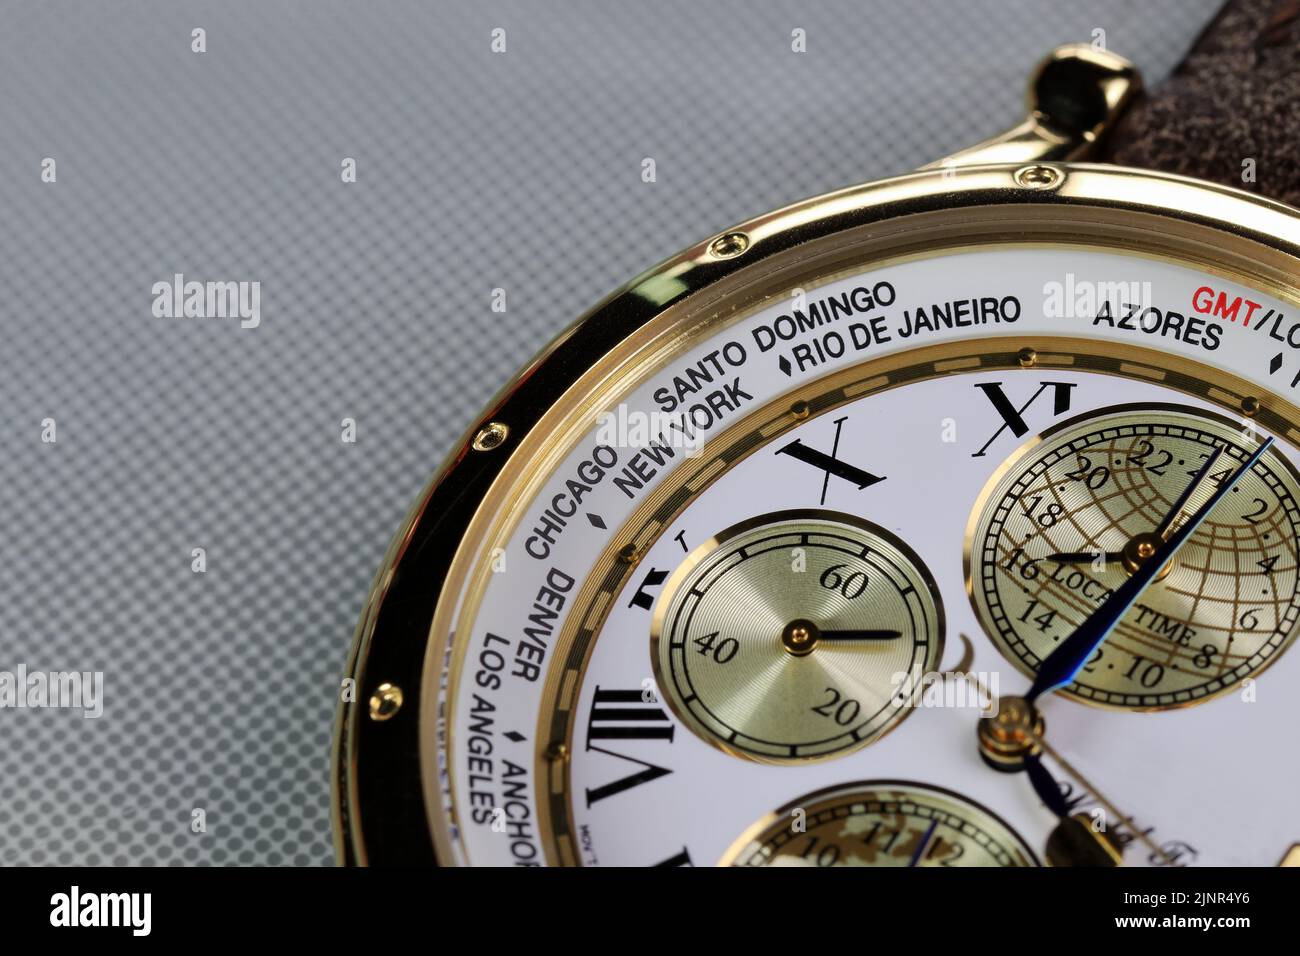 close up on Time zone cities name on luxury world time watch bezel. Stock Photo